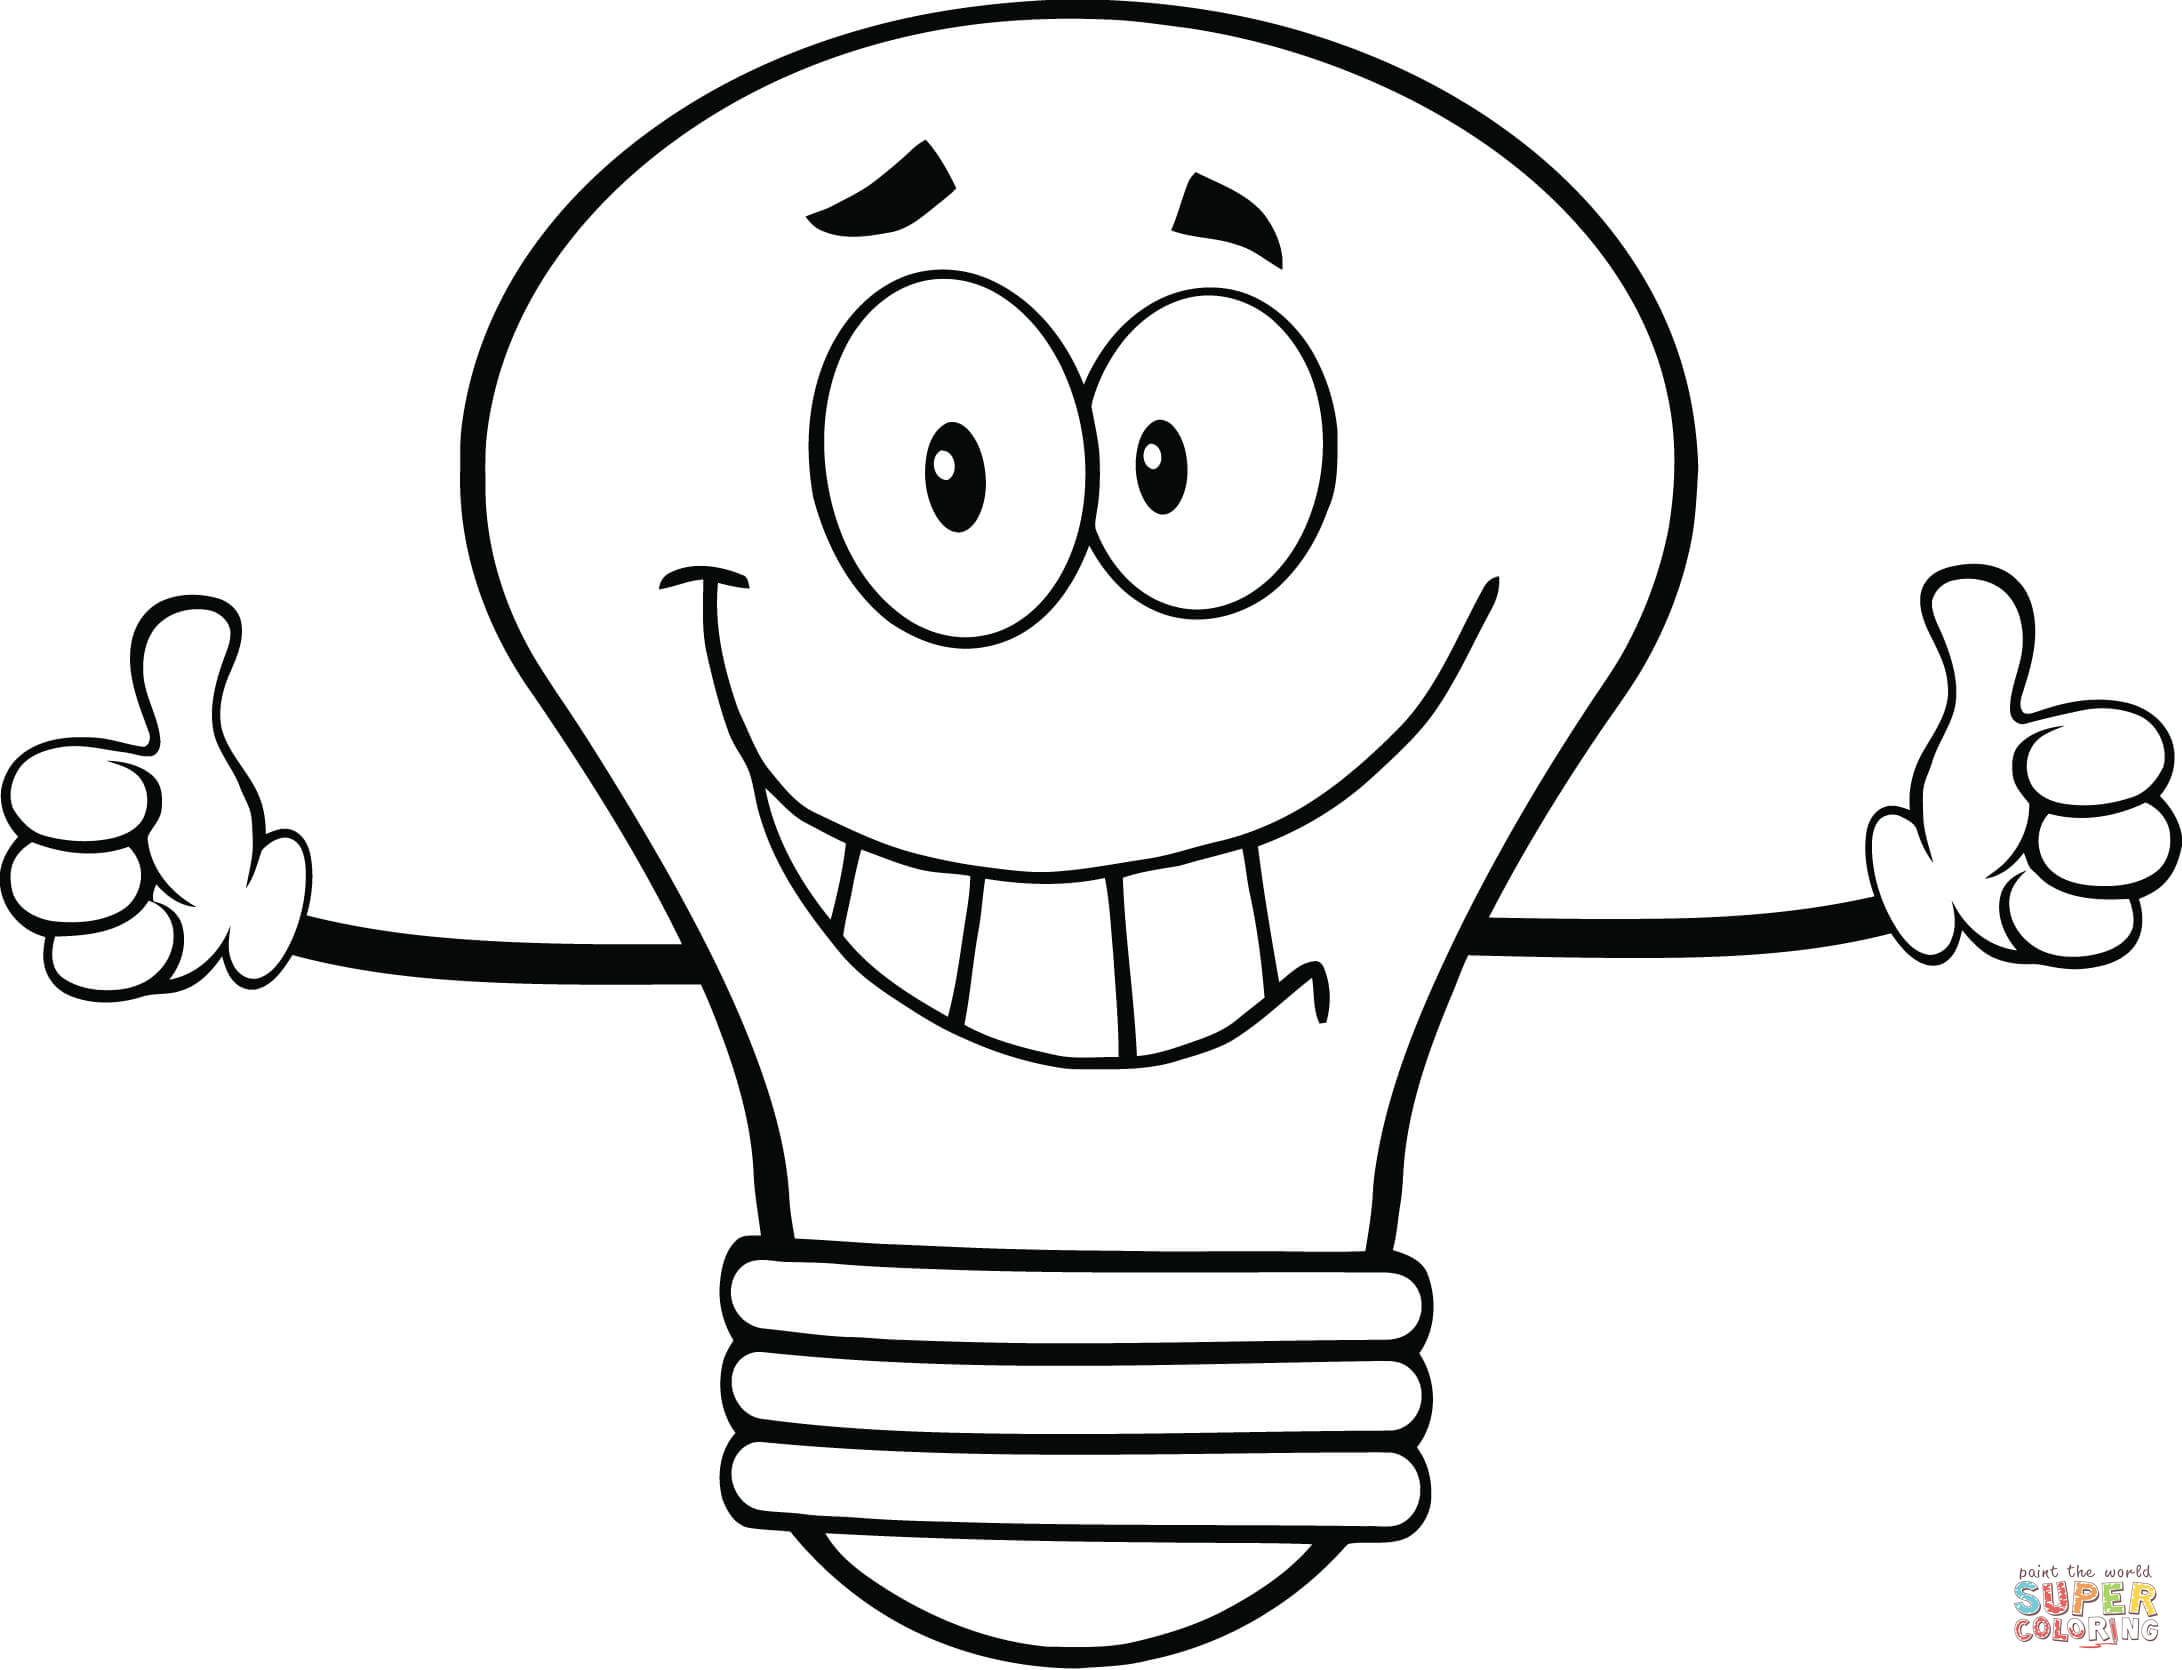 Light Bulb Line Drawing at GetDrawings.com | Free for personal use